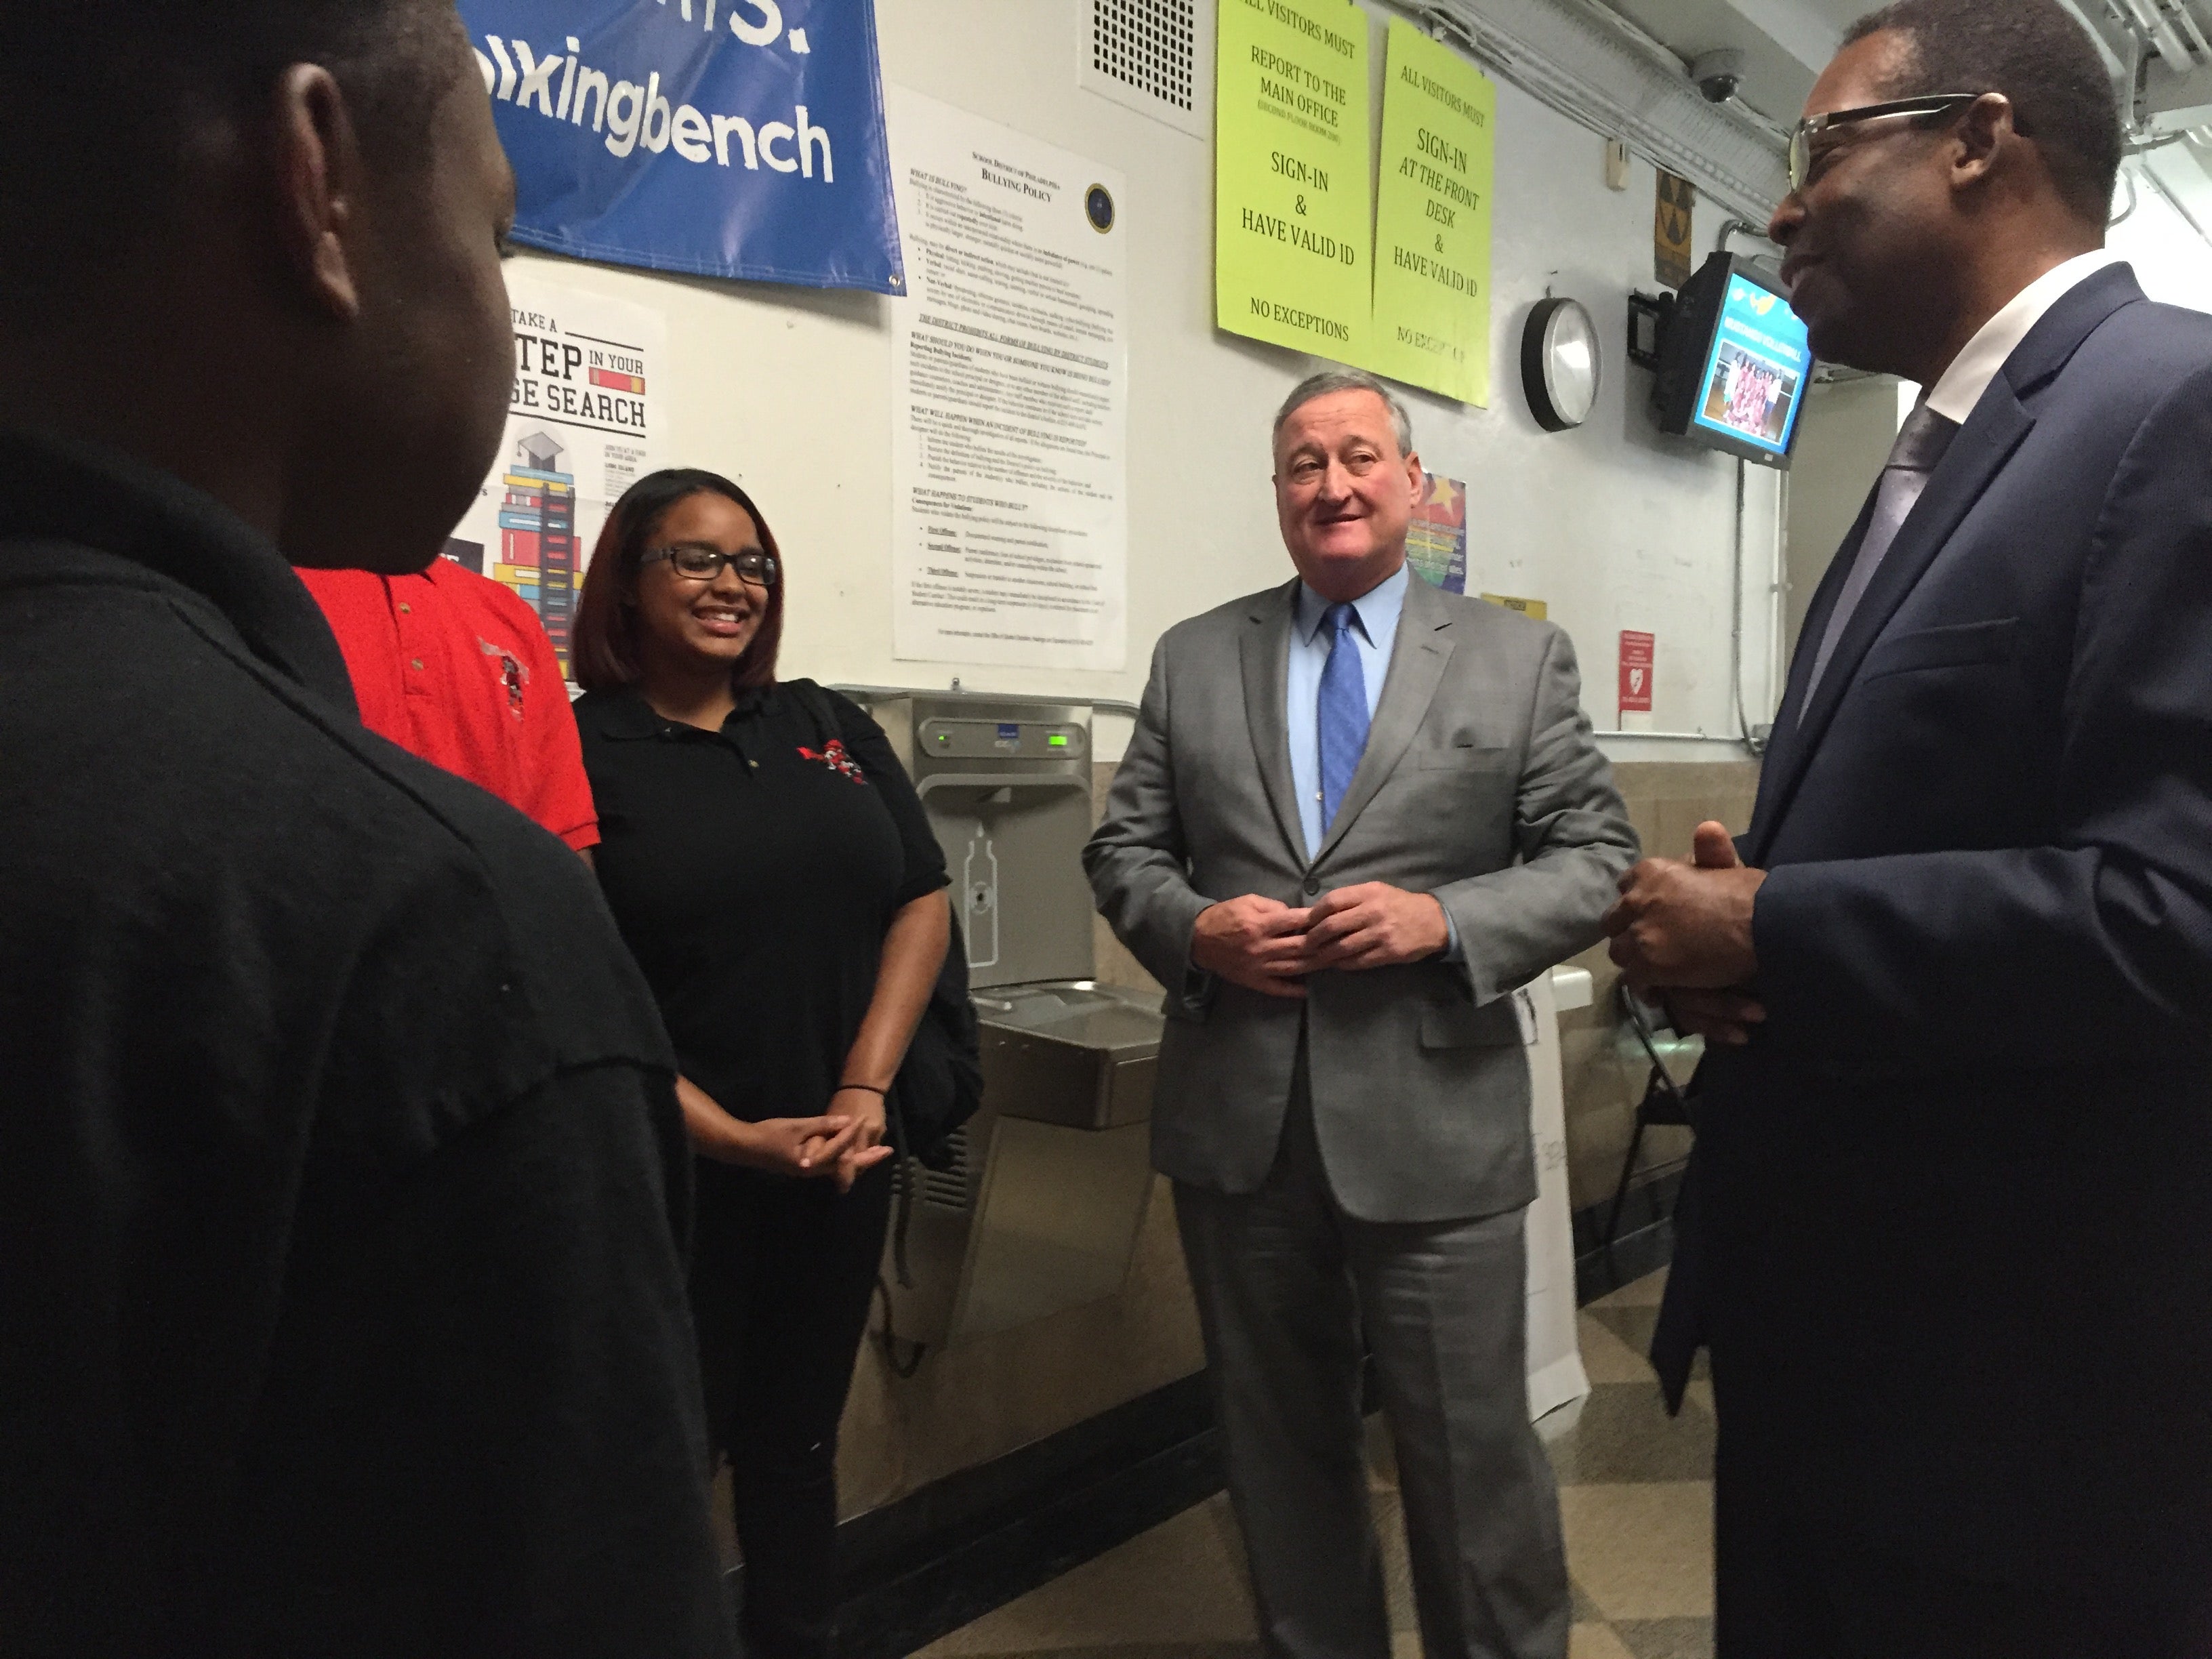 Mayor Jim Kenney and City Council President Darrell Clarke talk to students on first day of school. (Avi Wolfman-Arent/WHYY)